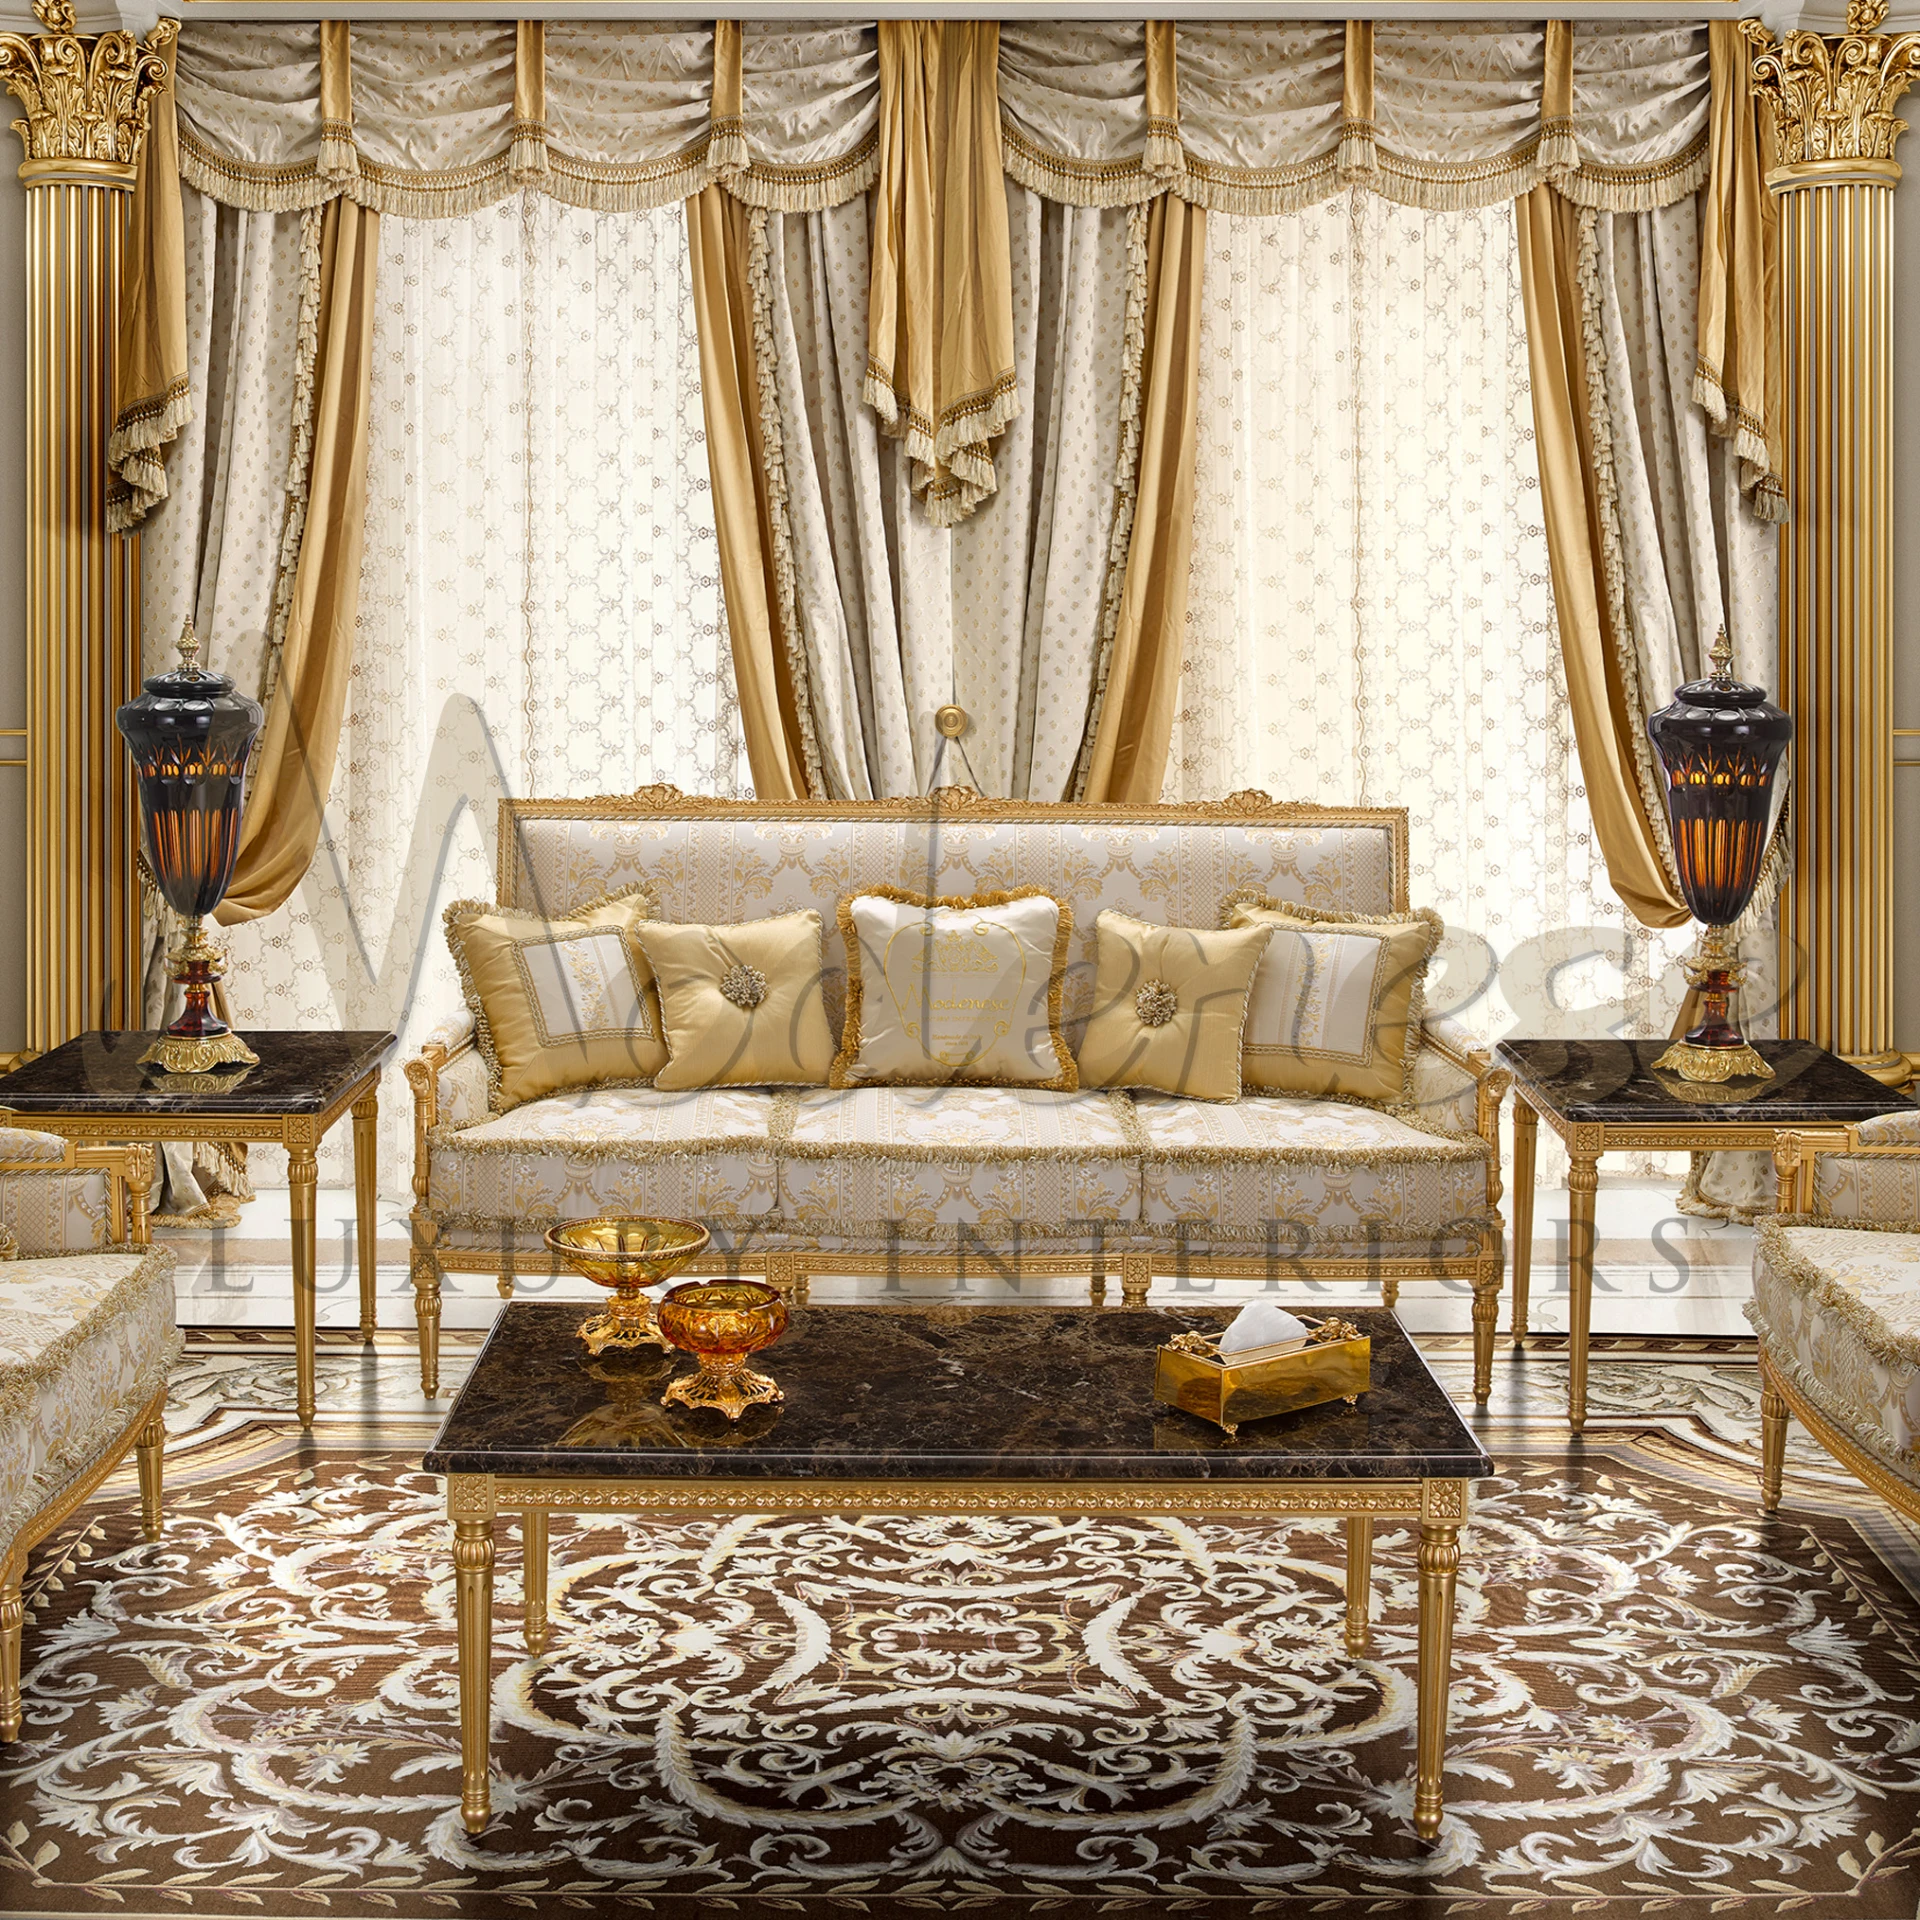 Masterpiece in Italian traditions - Divine Rectangular Side Table with Gold Leaf Accents